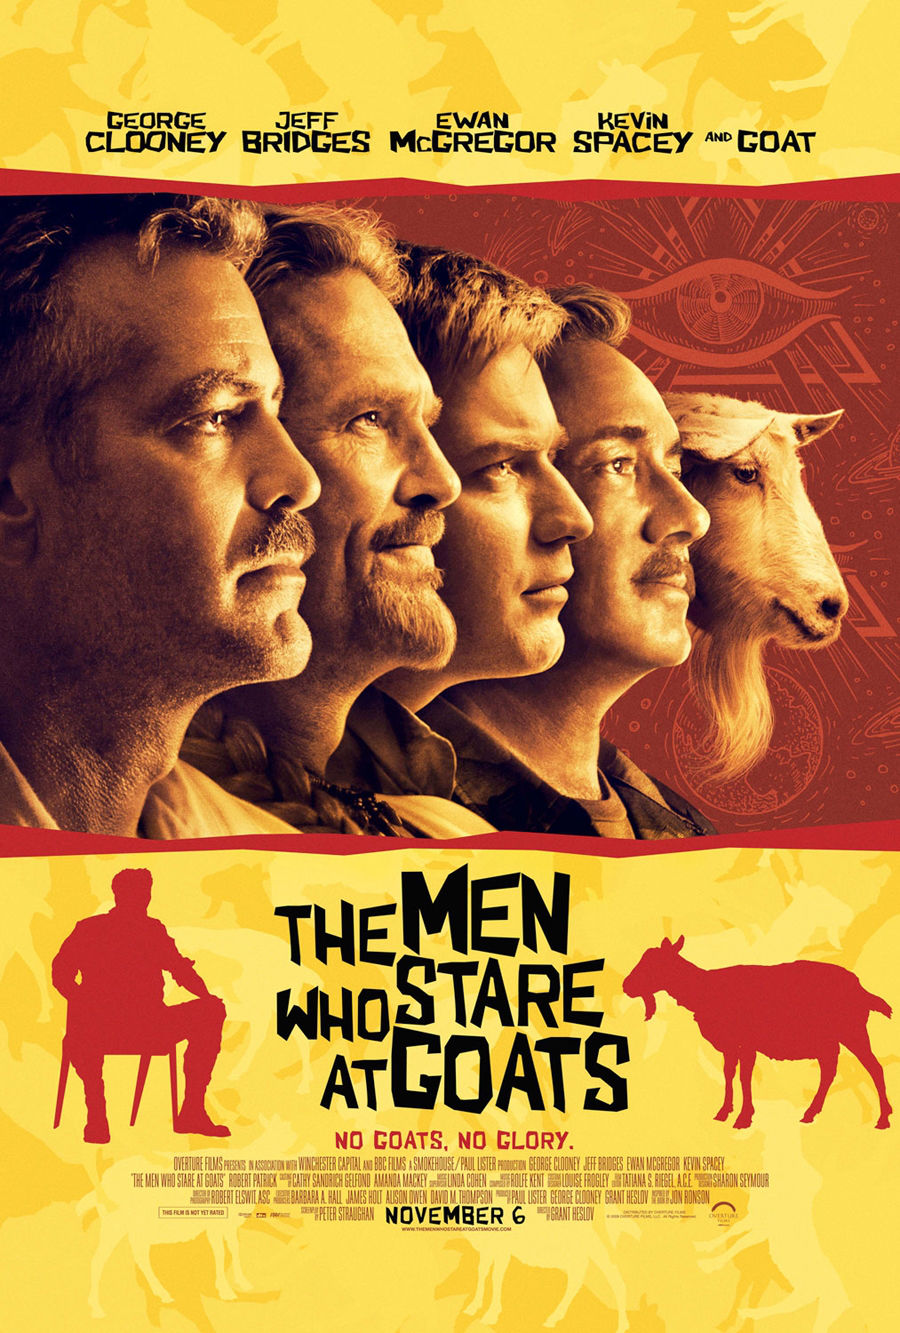 You are currently viewing Notes On A Film: The Men Who Stare At Goats